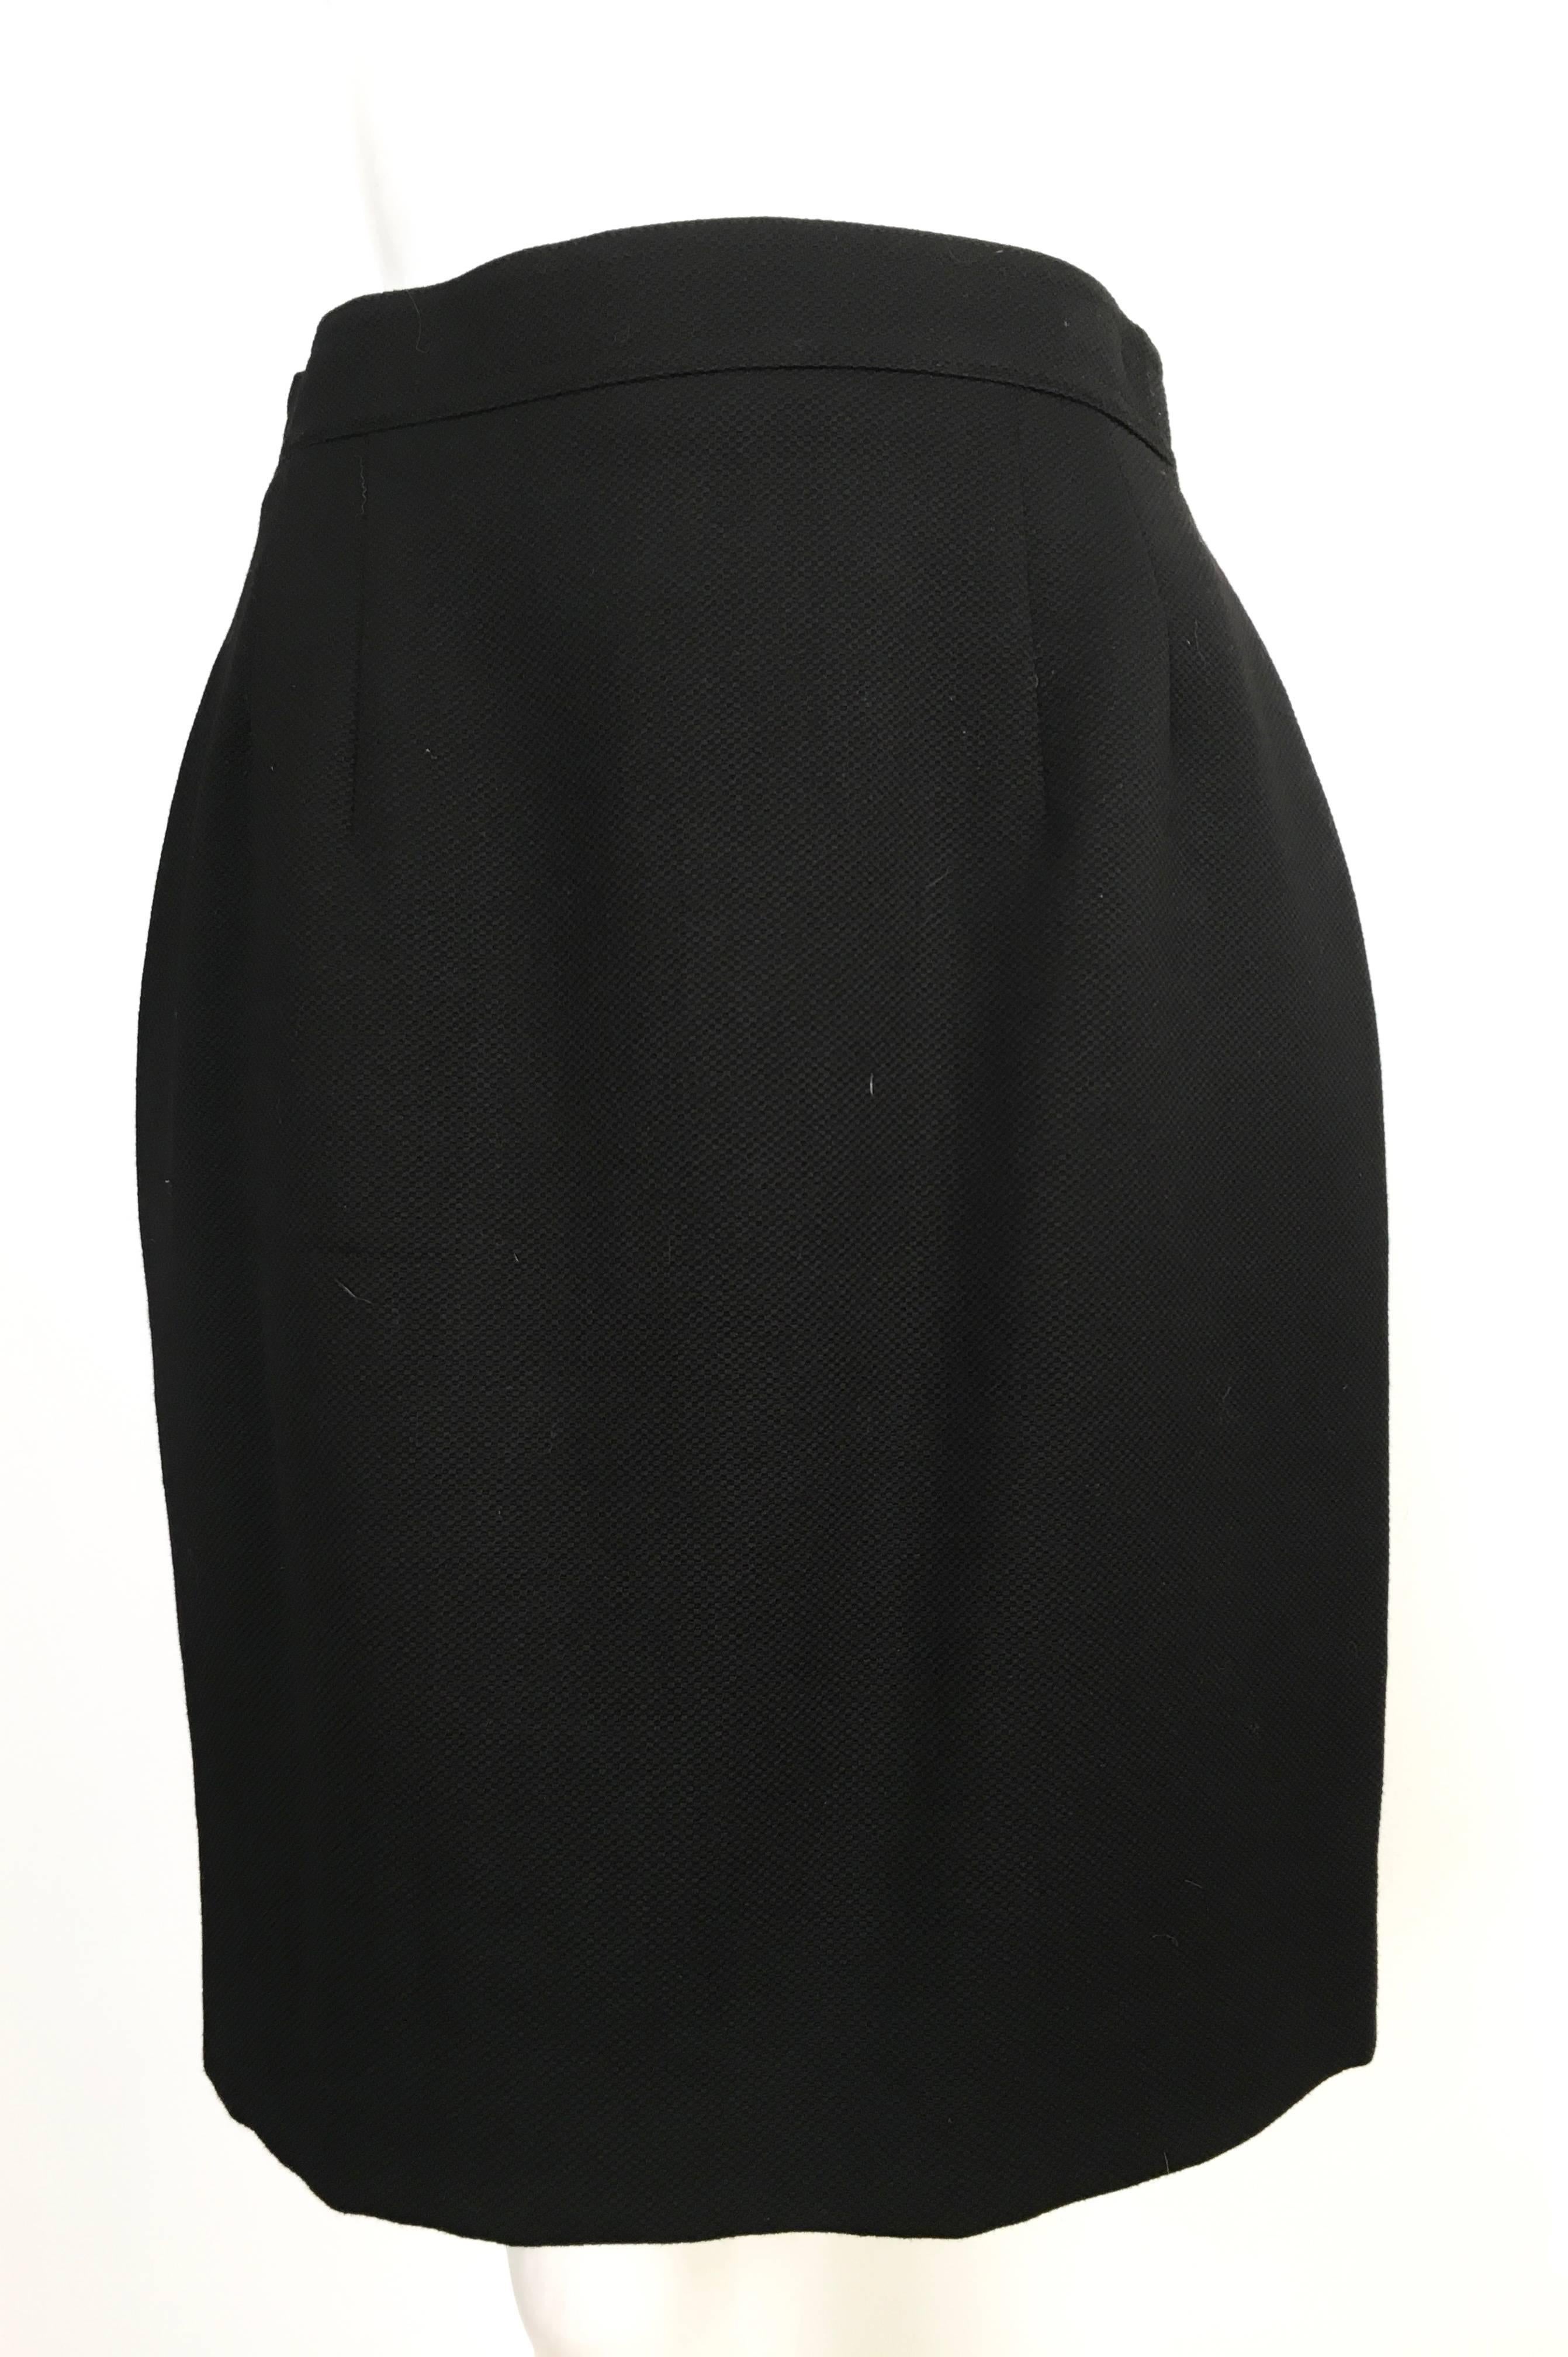 Karl Lagerfeld 1990s Black Wool Pencil Skirt Size 6. In Excellent Condition For Sale In Atlanta, GA